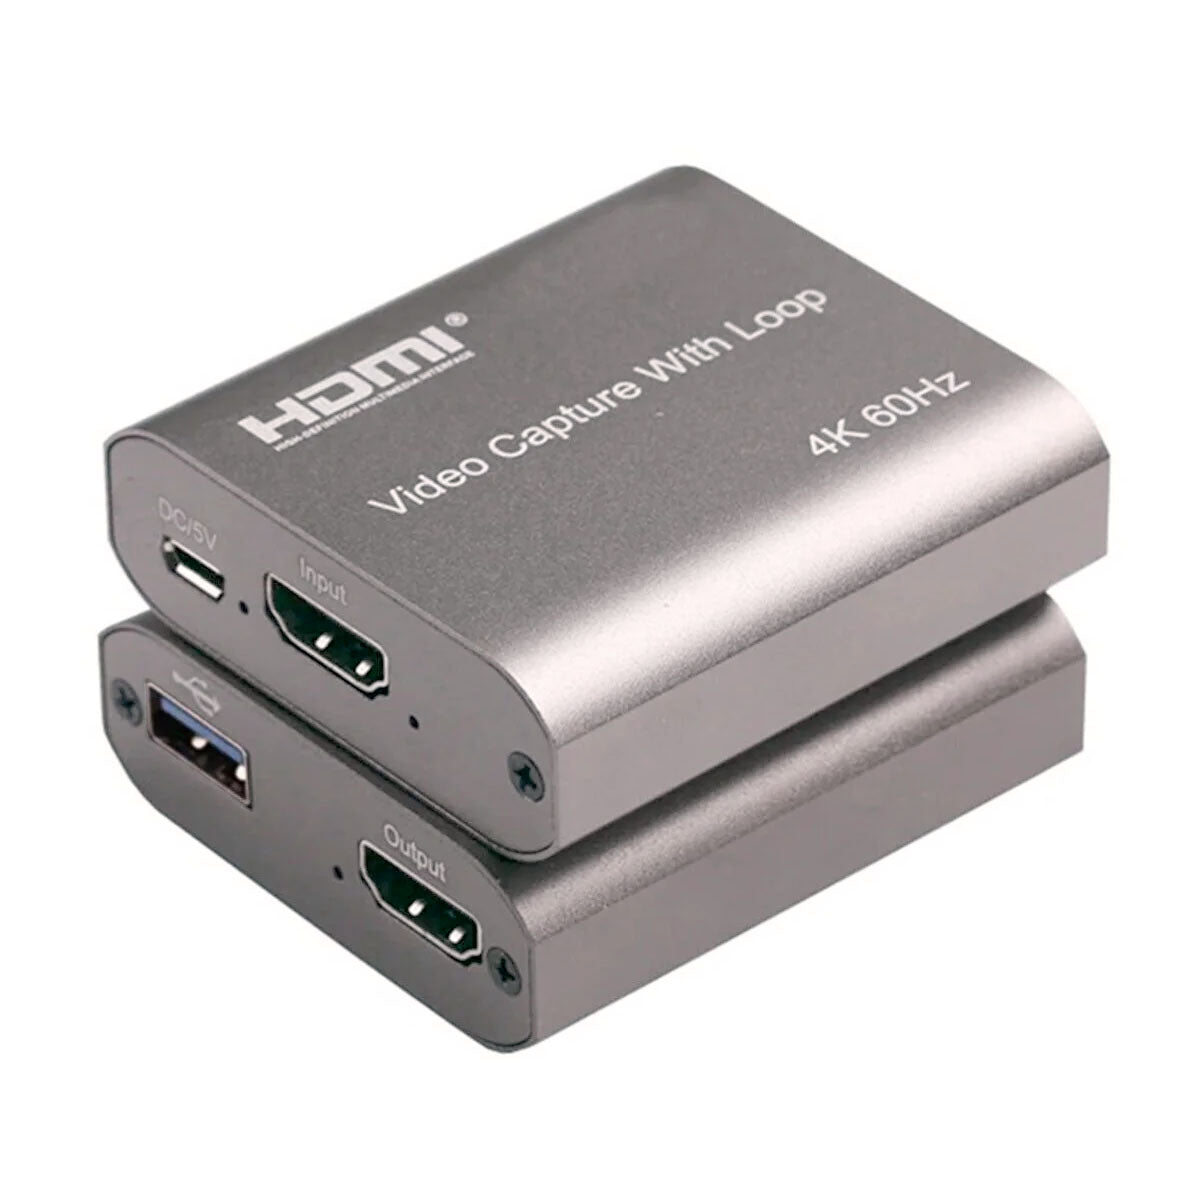 ArgoX HDMI to USB3.0 Video Capture with Audio + Loop, 4K 60Hz, USB3.0 to Micro USB Cable, 3.5mm Stereo Output, Support 18Gbps and TMDS Clock, Deep Color, AWG26 HDMI Supported, Support Uncompressed YUY2, VLC/ OBS/Amcap | HDVC6 HDVC10 HDVC13